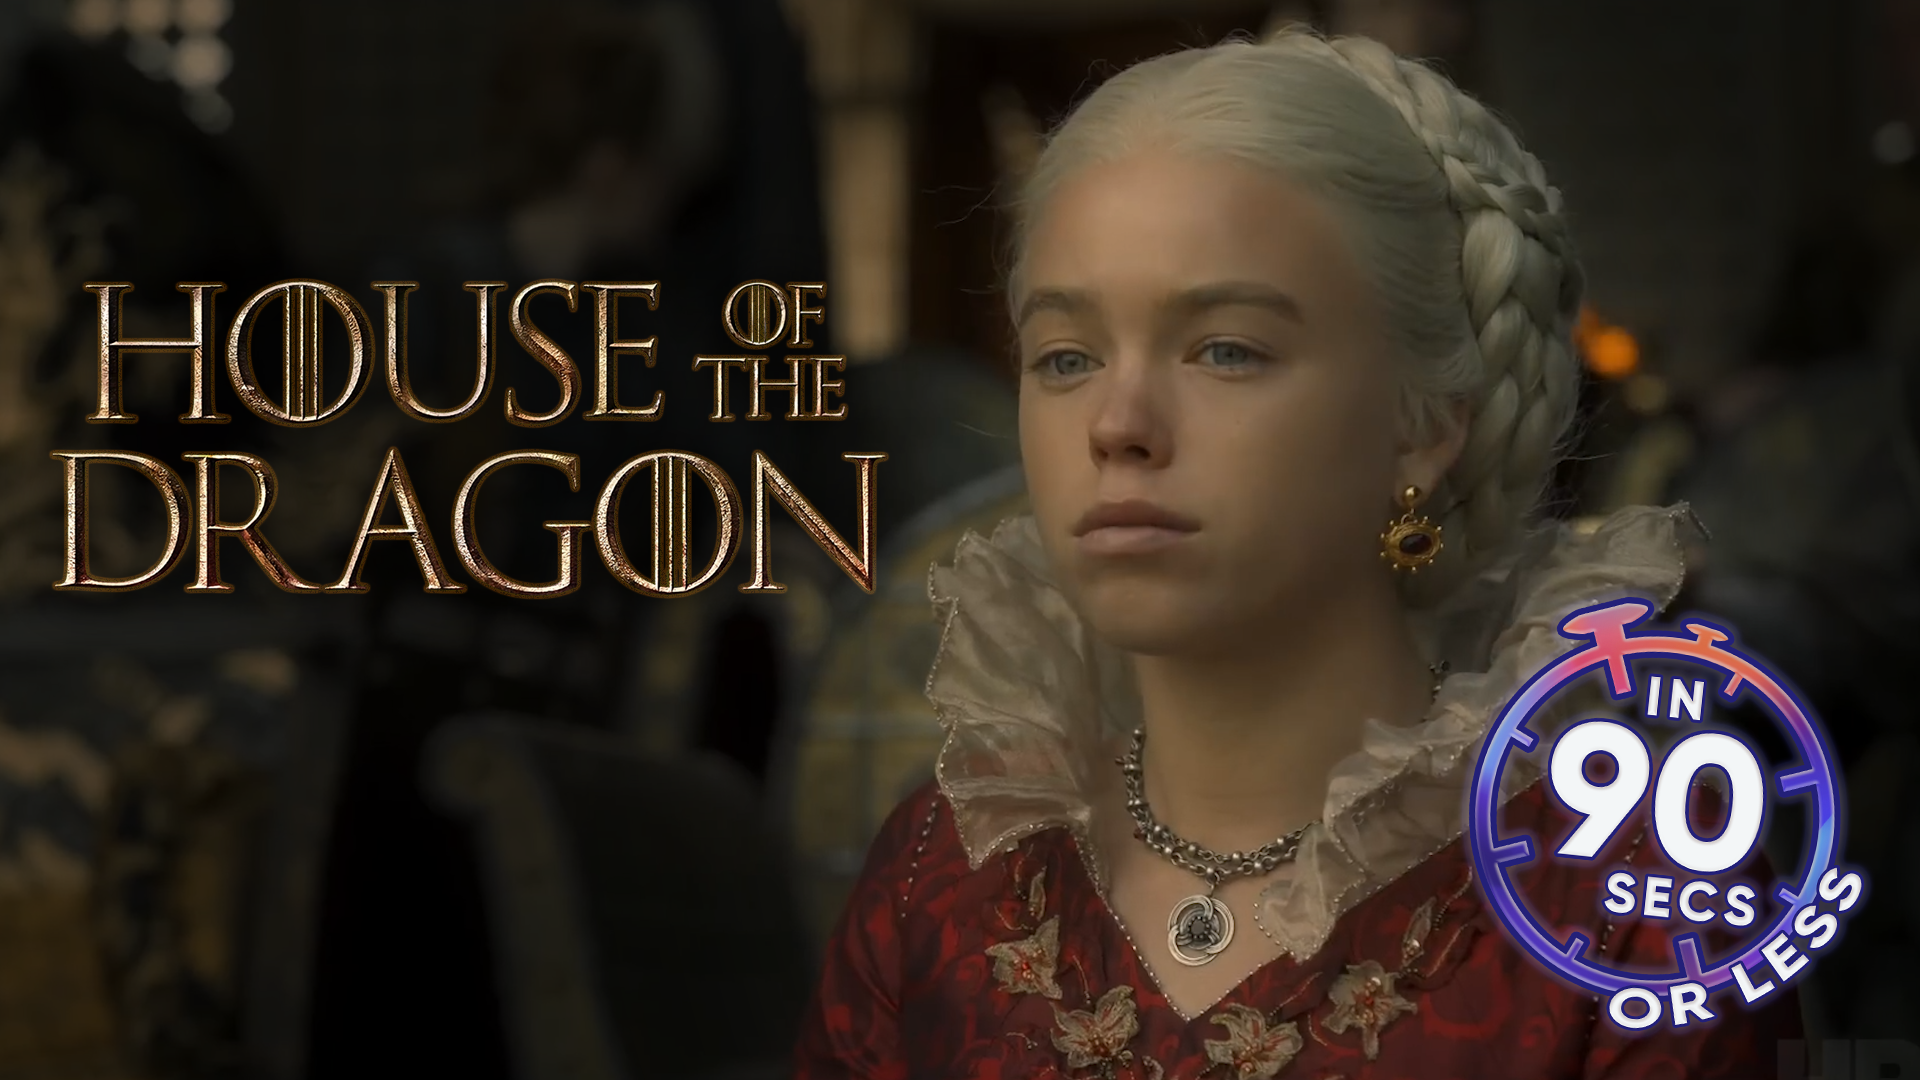 How House of the Dragon Connects to Game of Thrones... In 90 Seconds or Less